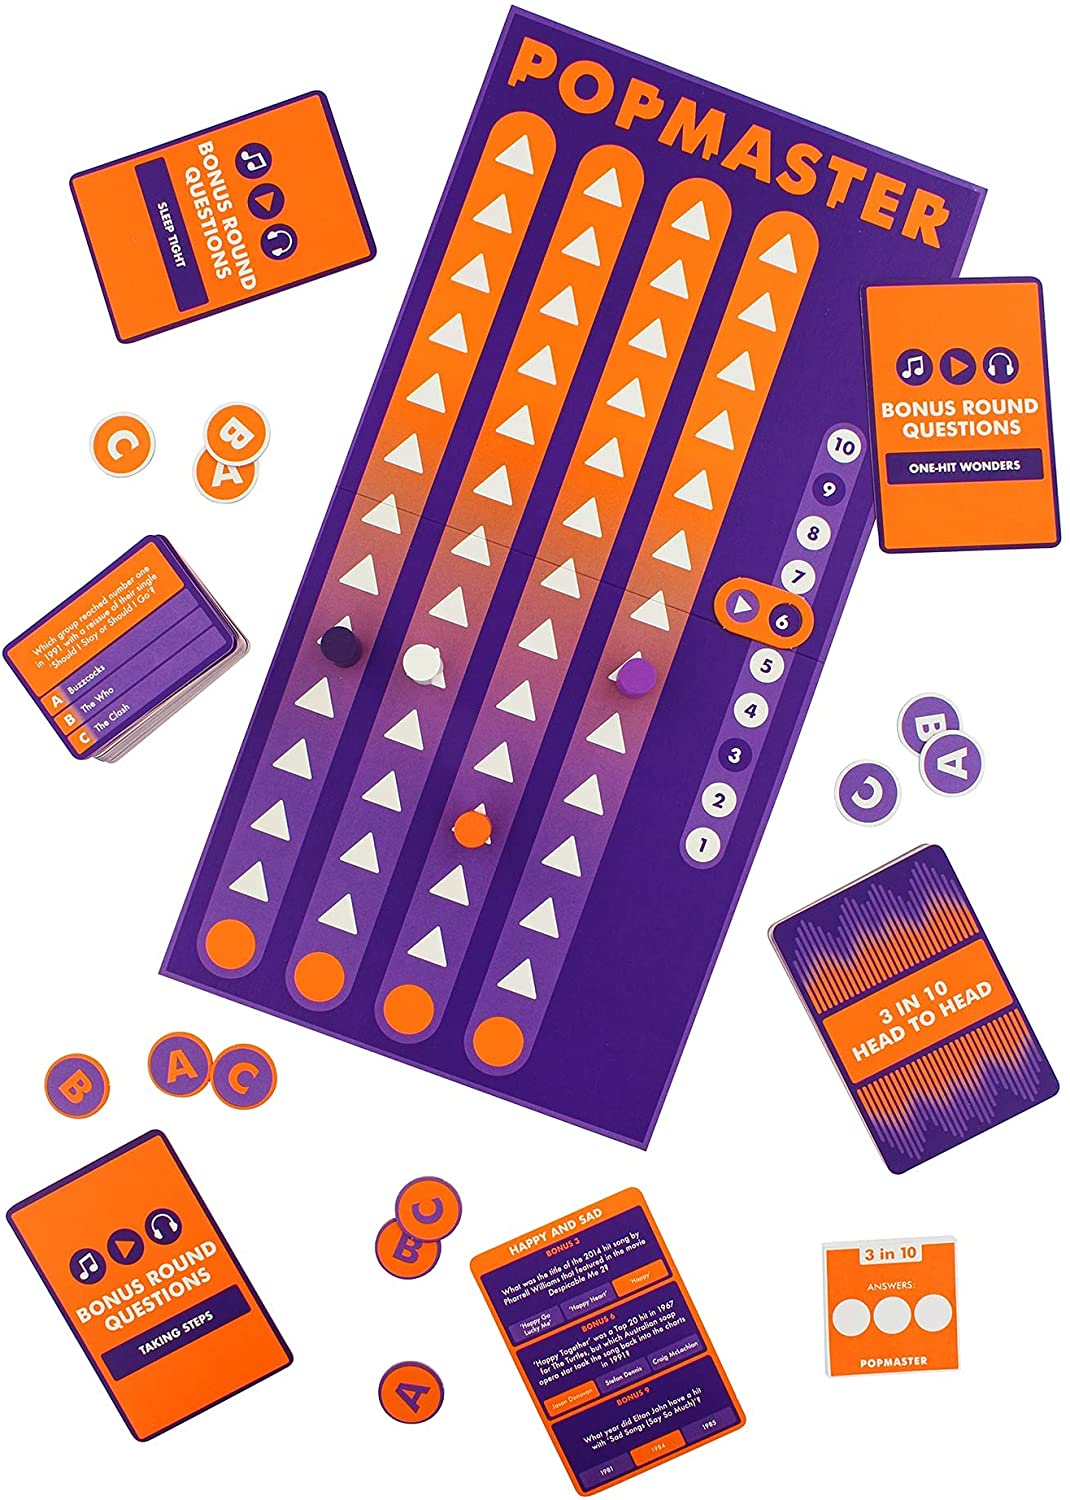 Ginger Fox Official PopMaster Board Game - Based on the BBC Radio 2 Quiz - Inclu